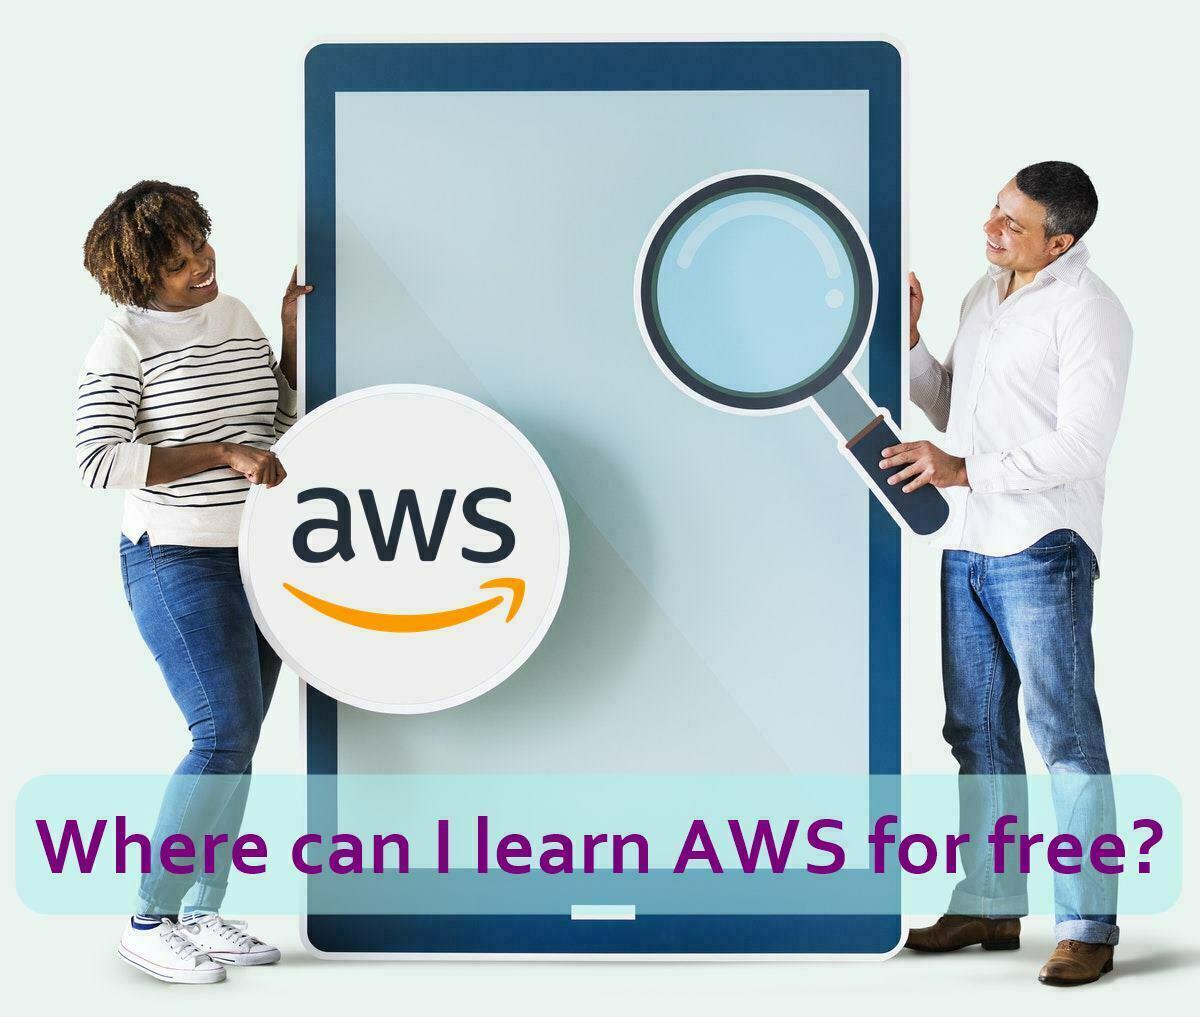 Where can I learn AWS for free?